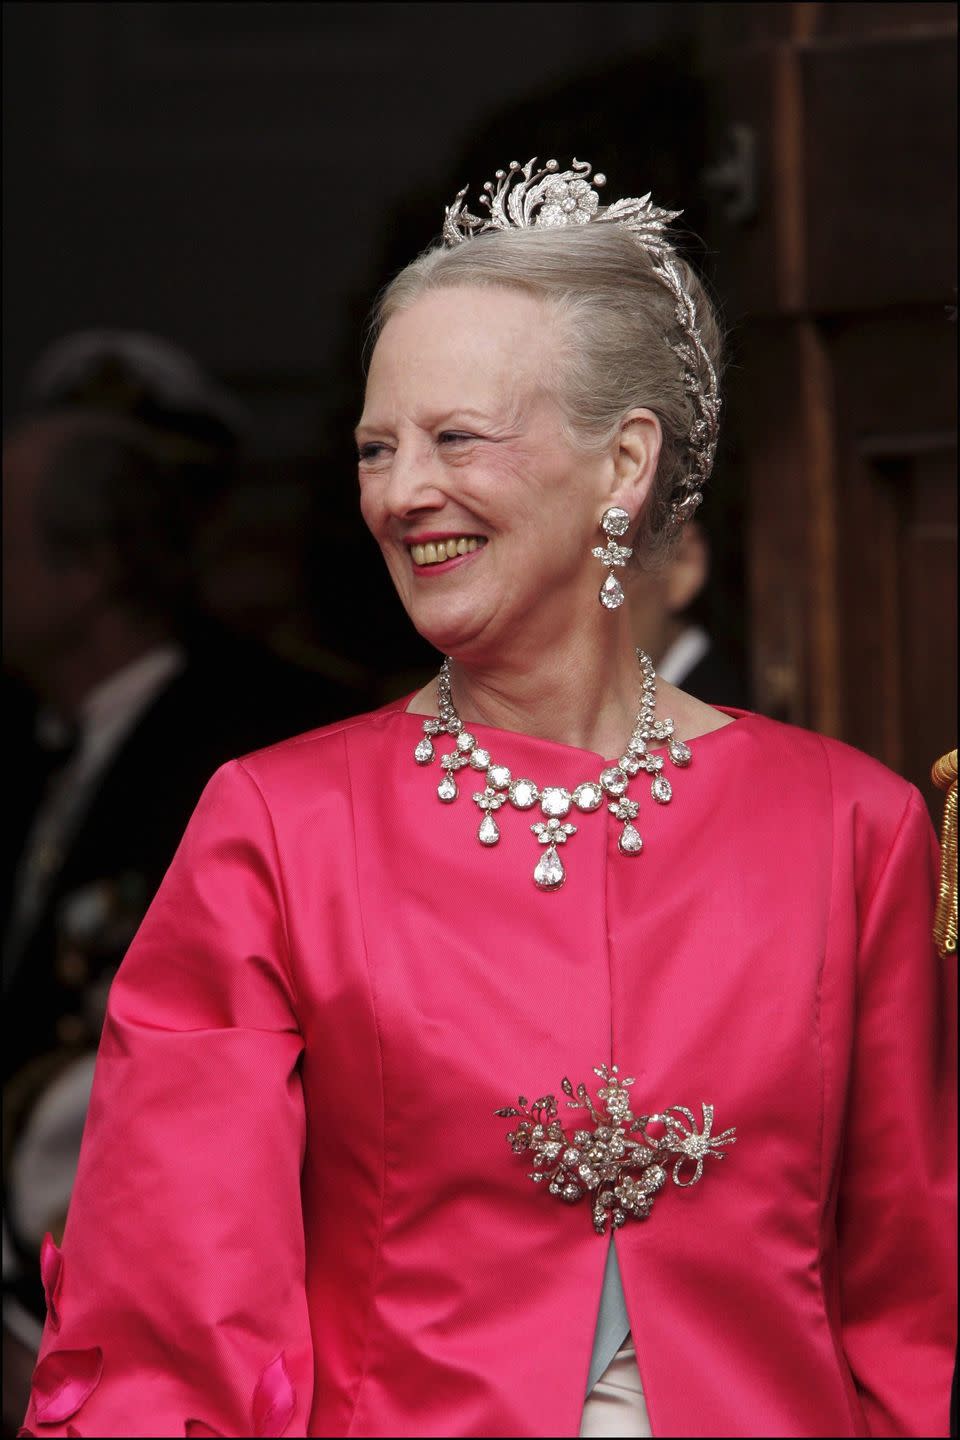 <p>Margrethe opted for a bold pink outfit for the wedding of her son Prince Frederik to Mary Donaldson, the future Princess Mary. According to <em><a href="https://www.thecourtjeweller.com/2021/04/queen-margrethe-iis-royal-tiaras.html" rel="nofollow noopener" target="_blank" data-ylk="slk:the Court Jeweller" class="link ">the Court Jeweller</a></em>, this avant-garde tiara was made for her in 1976 by Arje Griesgst.</p>